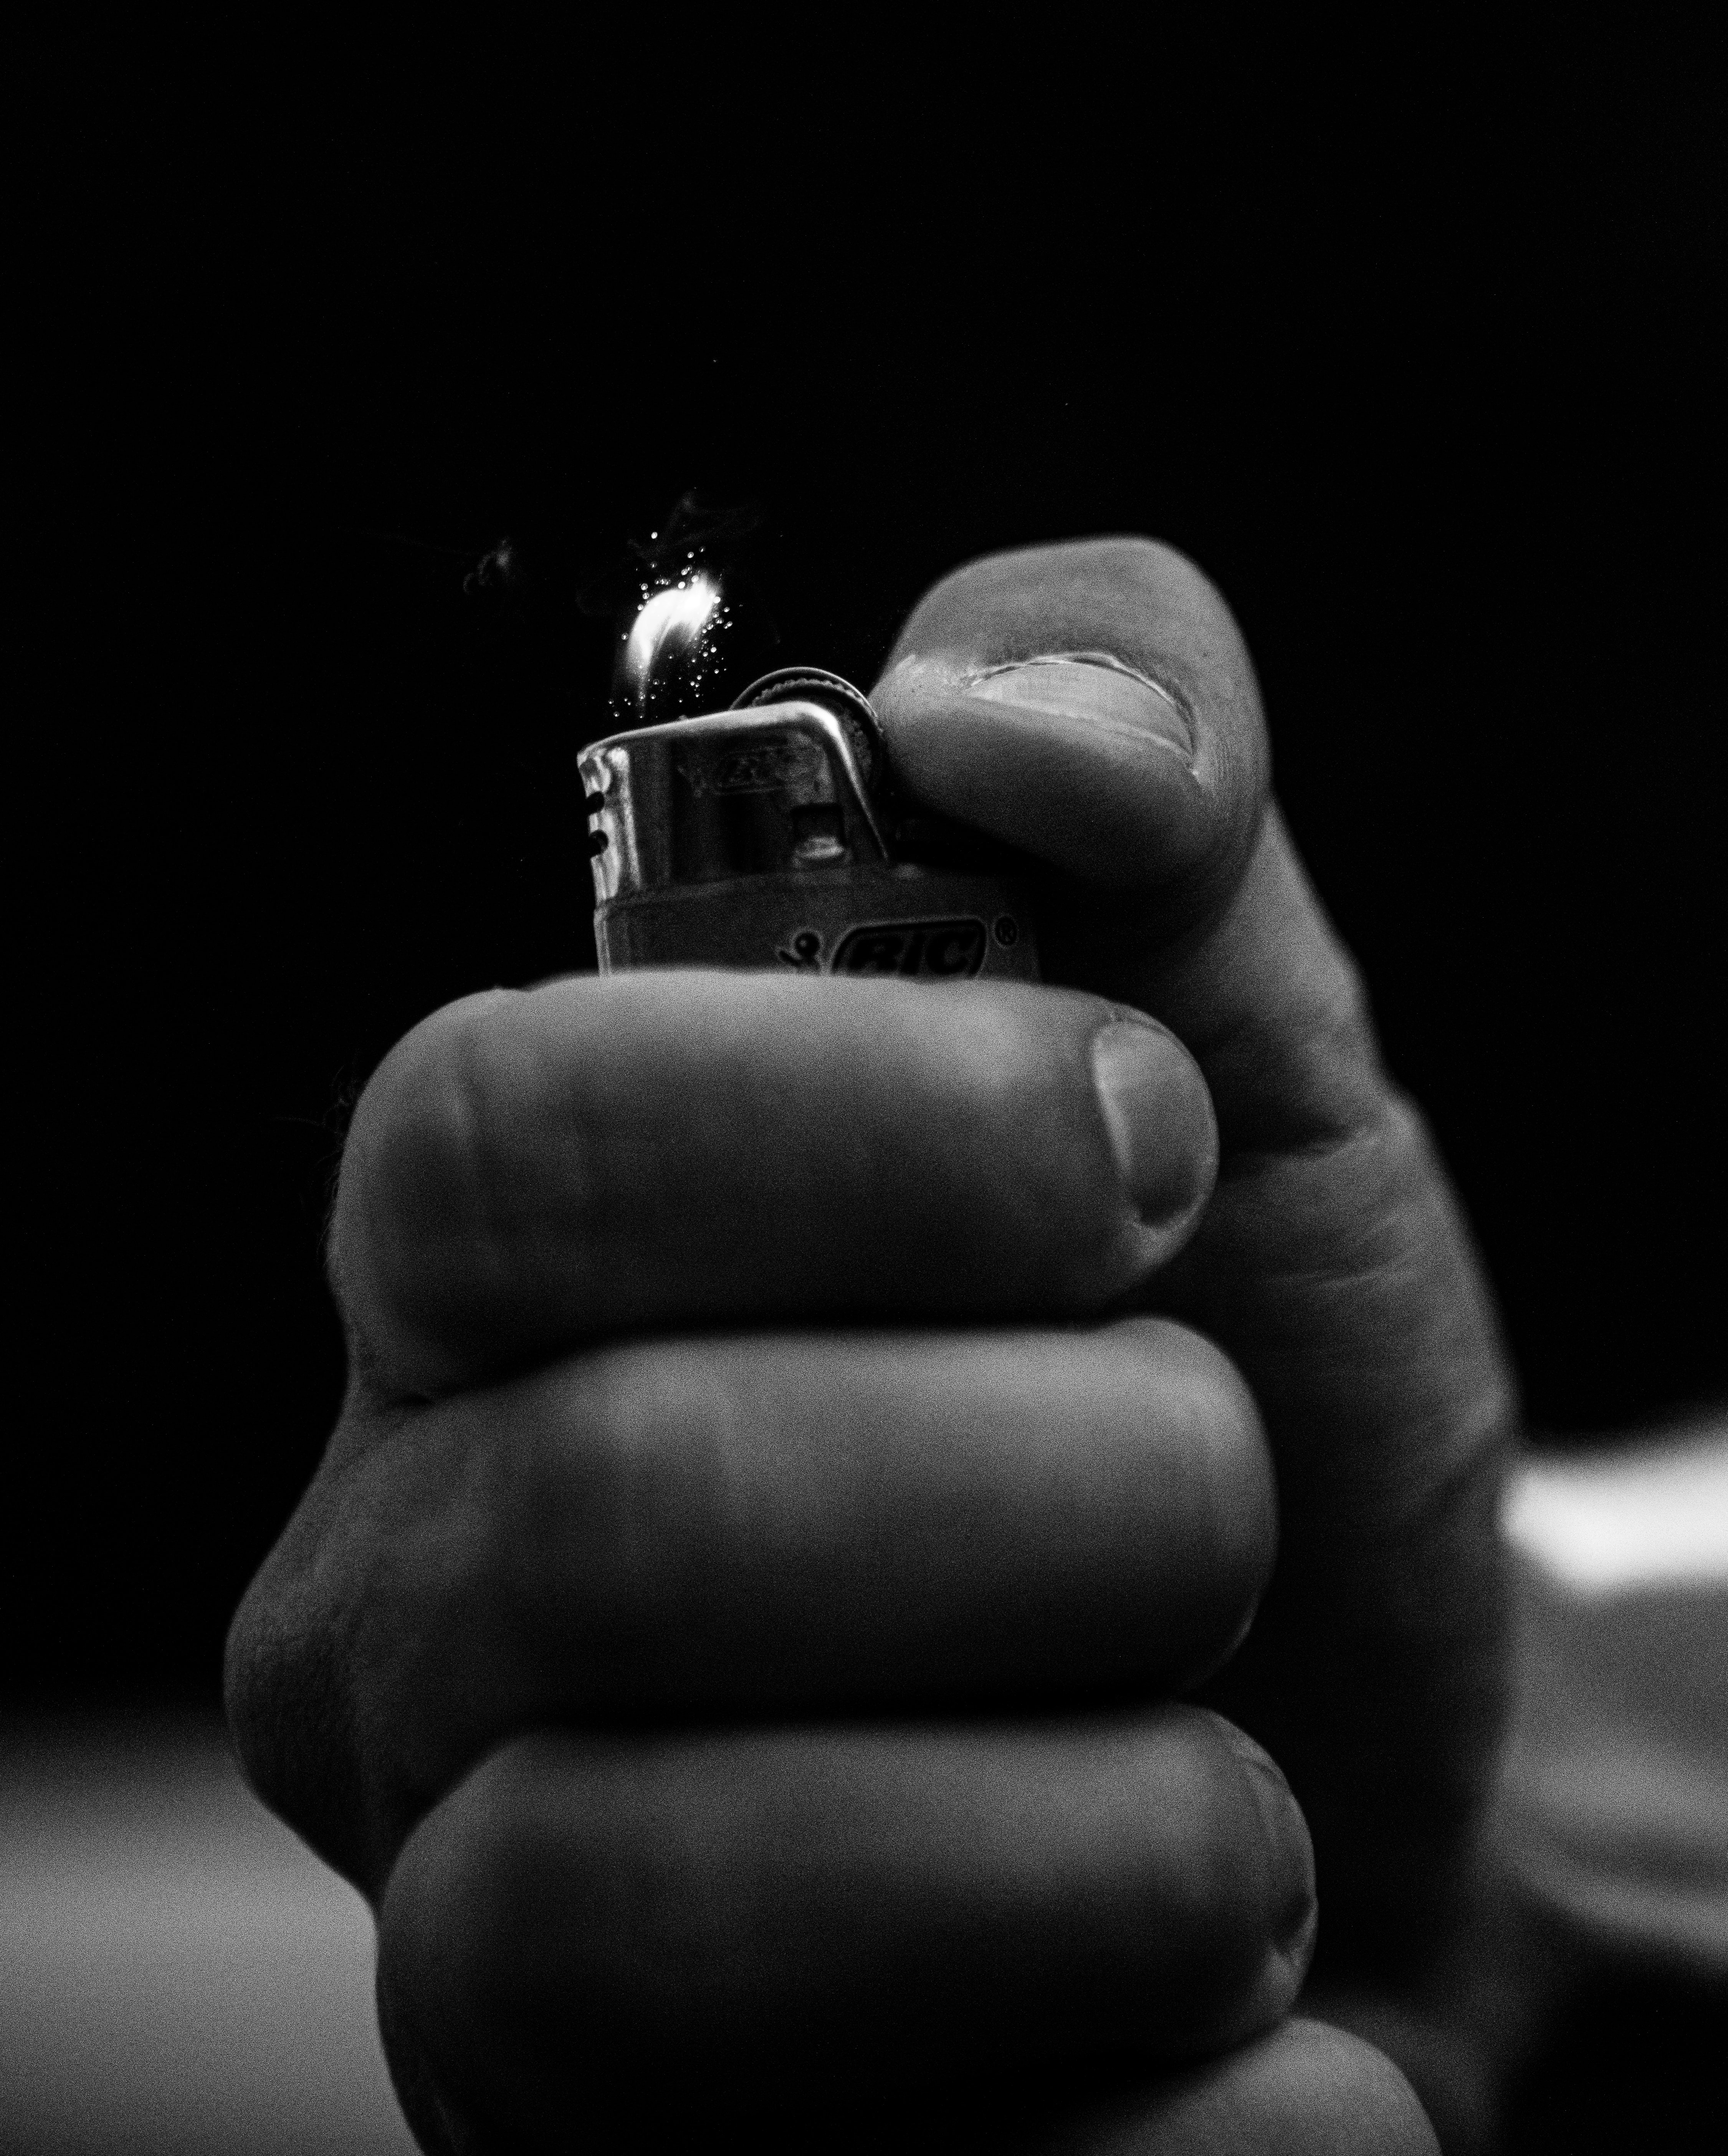 hand, sparks, miscellanea, miscellaneous, bw, chb, lighter